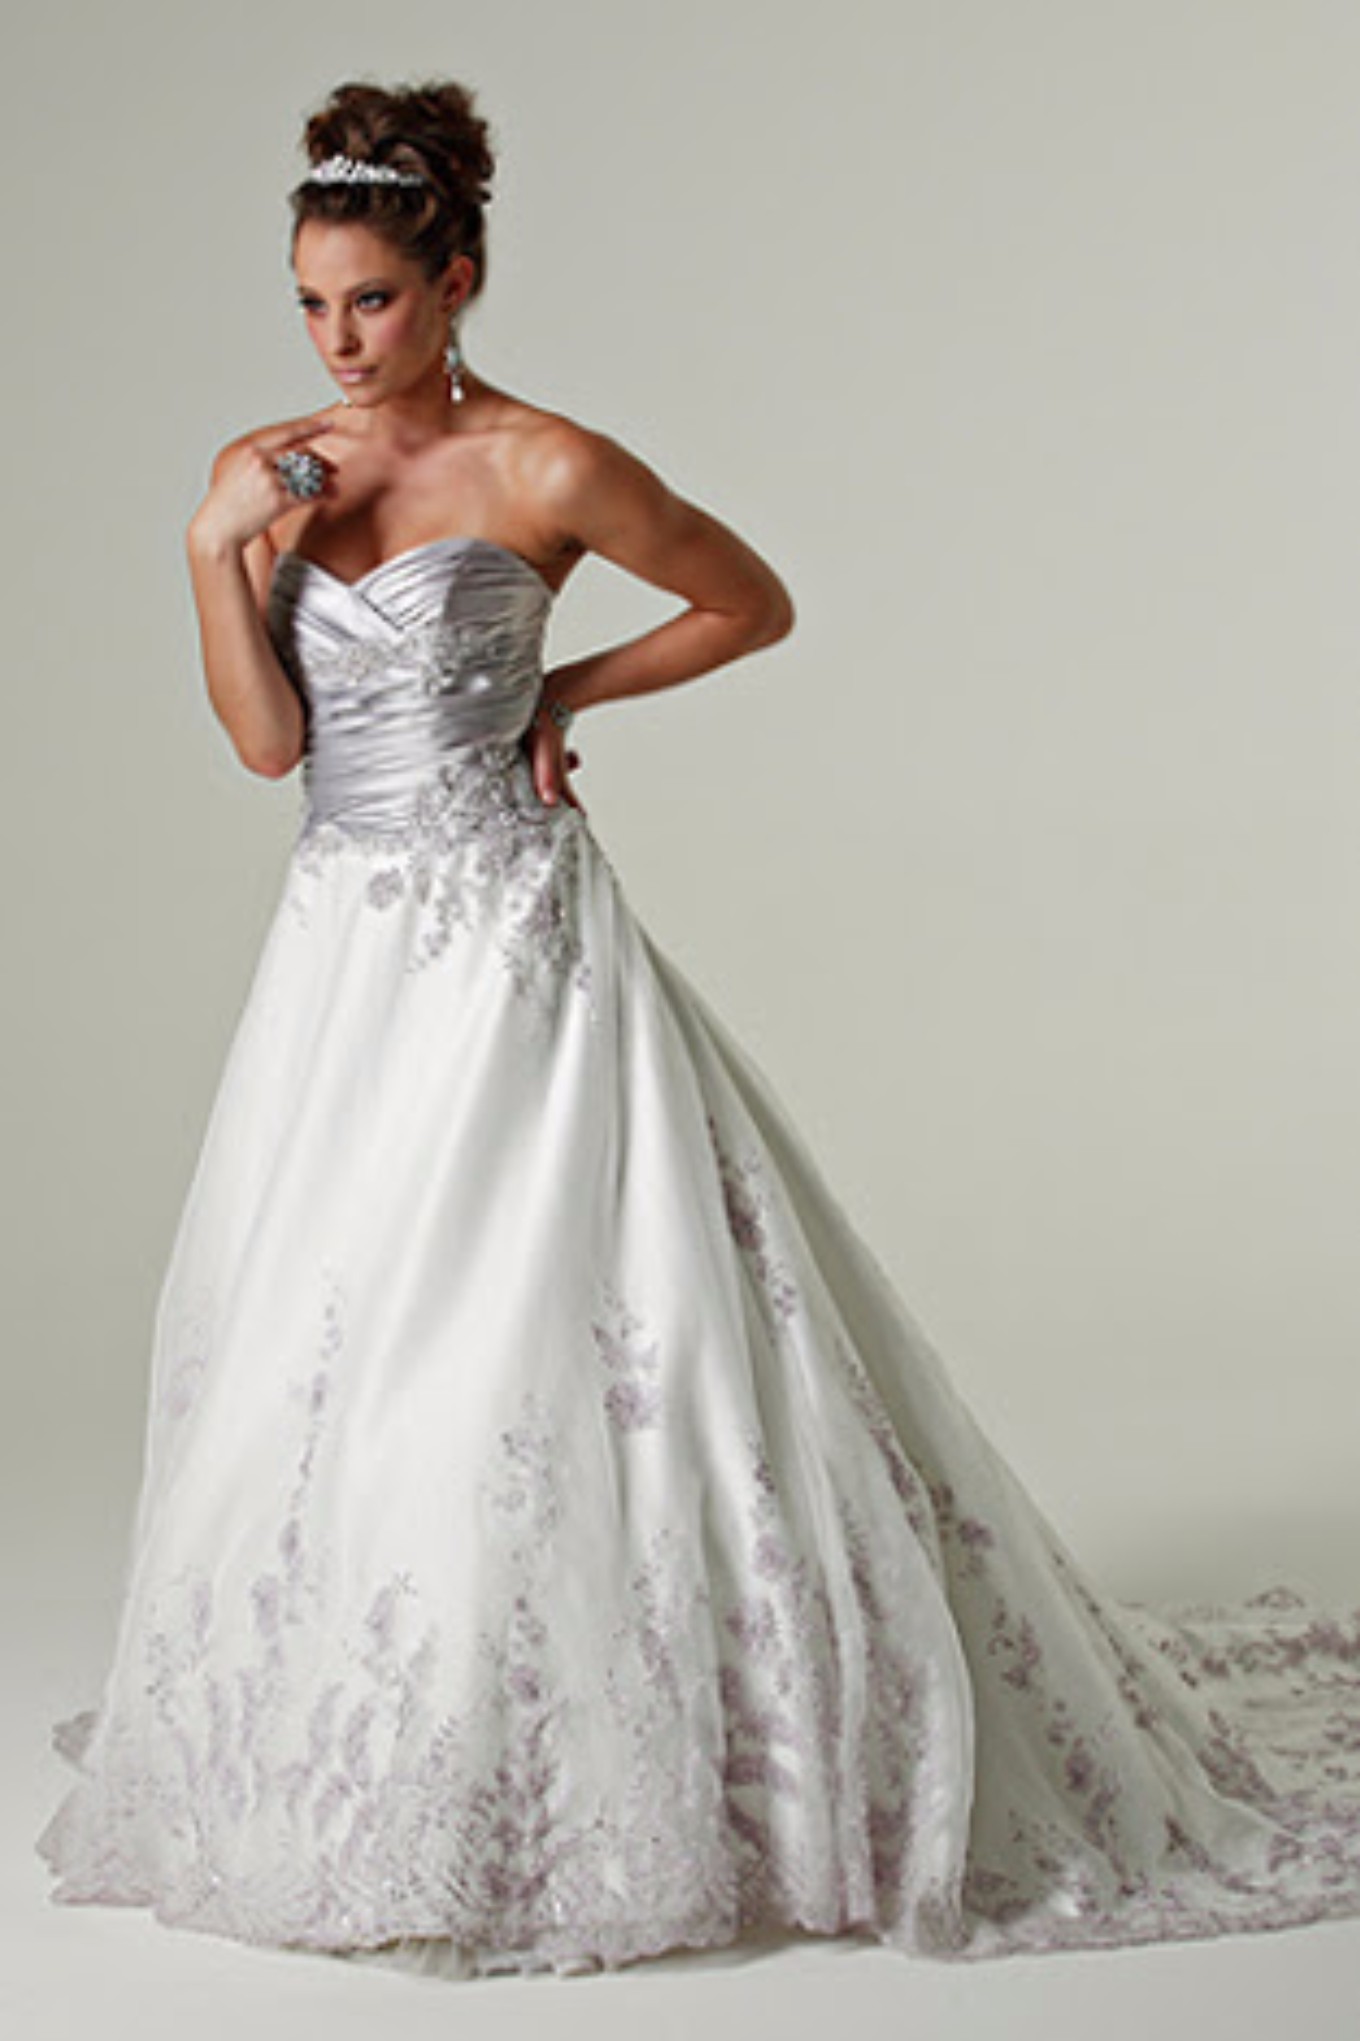  Henry  Roth  21850 New Wedding  Dress  on Sale 70 Off 